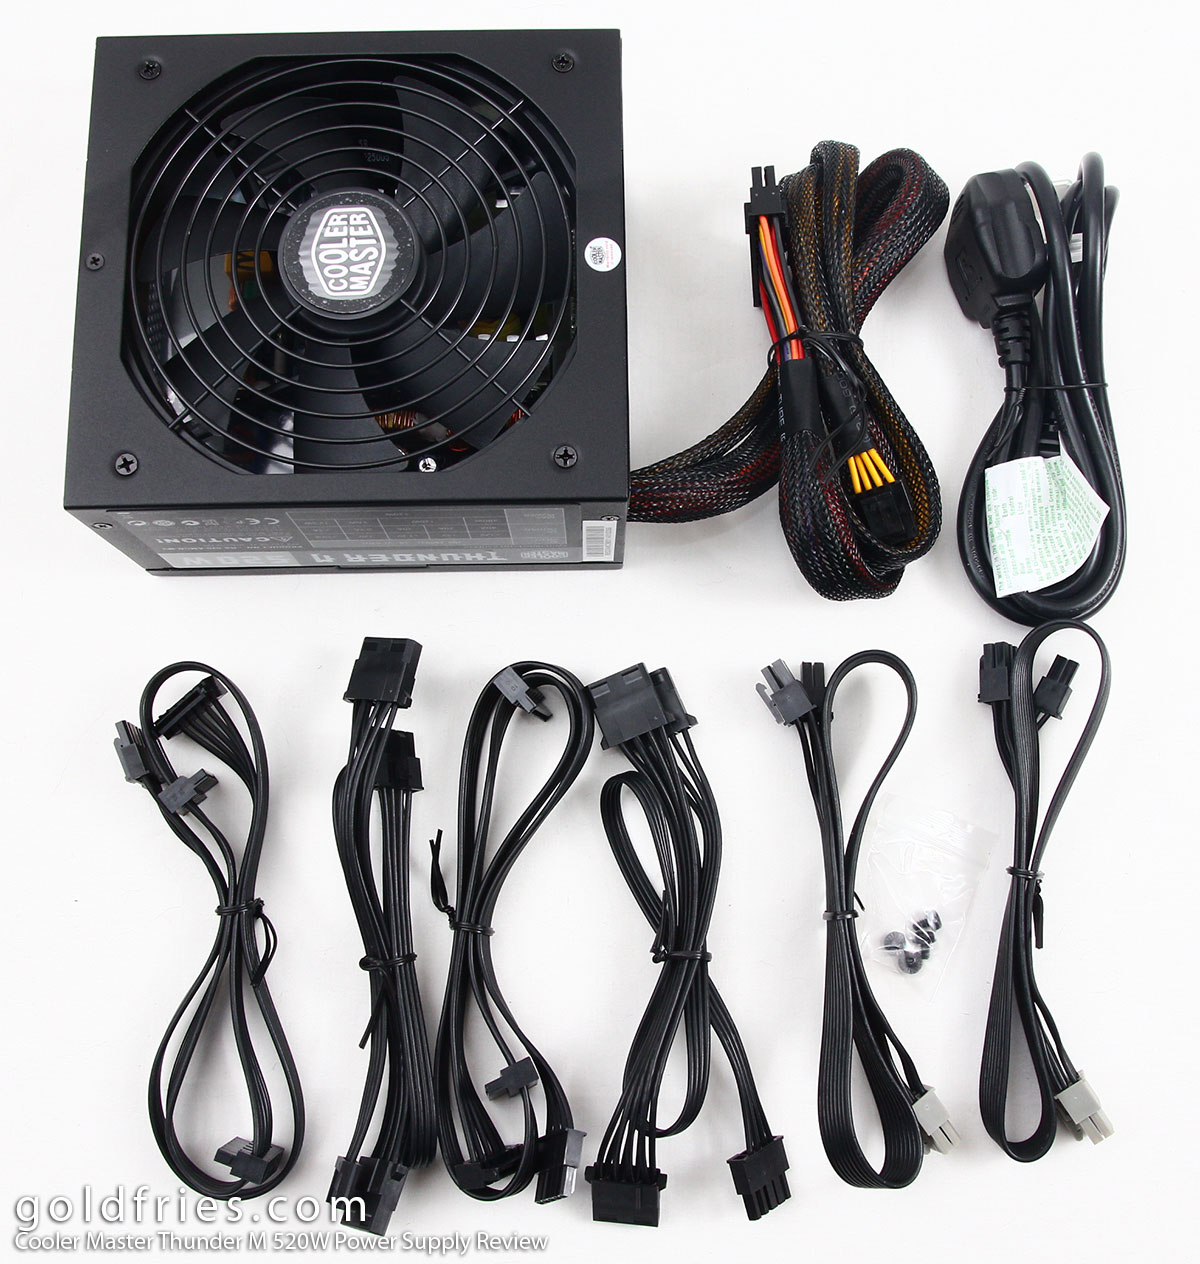 Cooler Master Thunder M 520W Power Supply Review